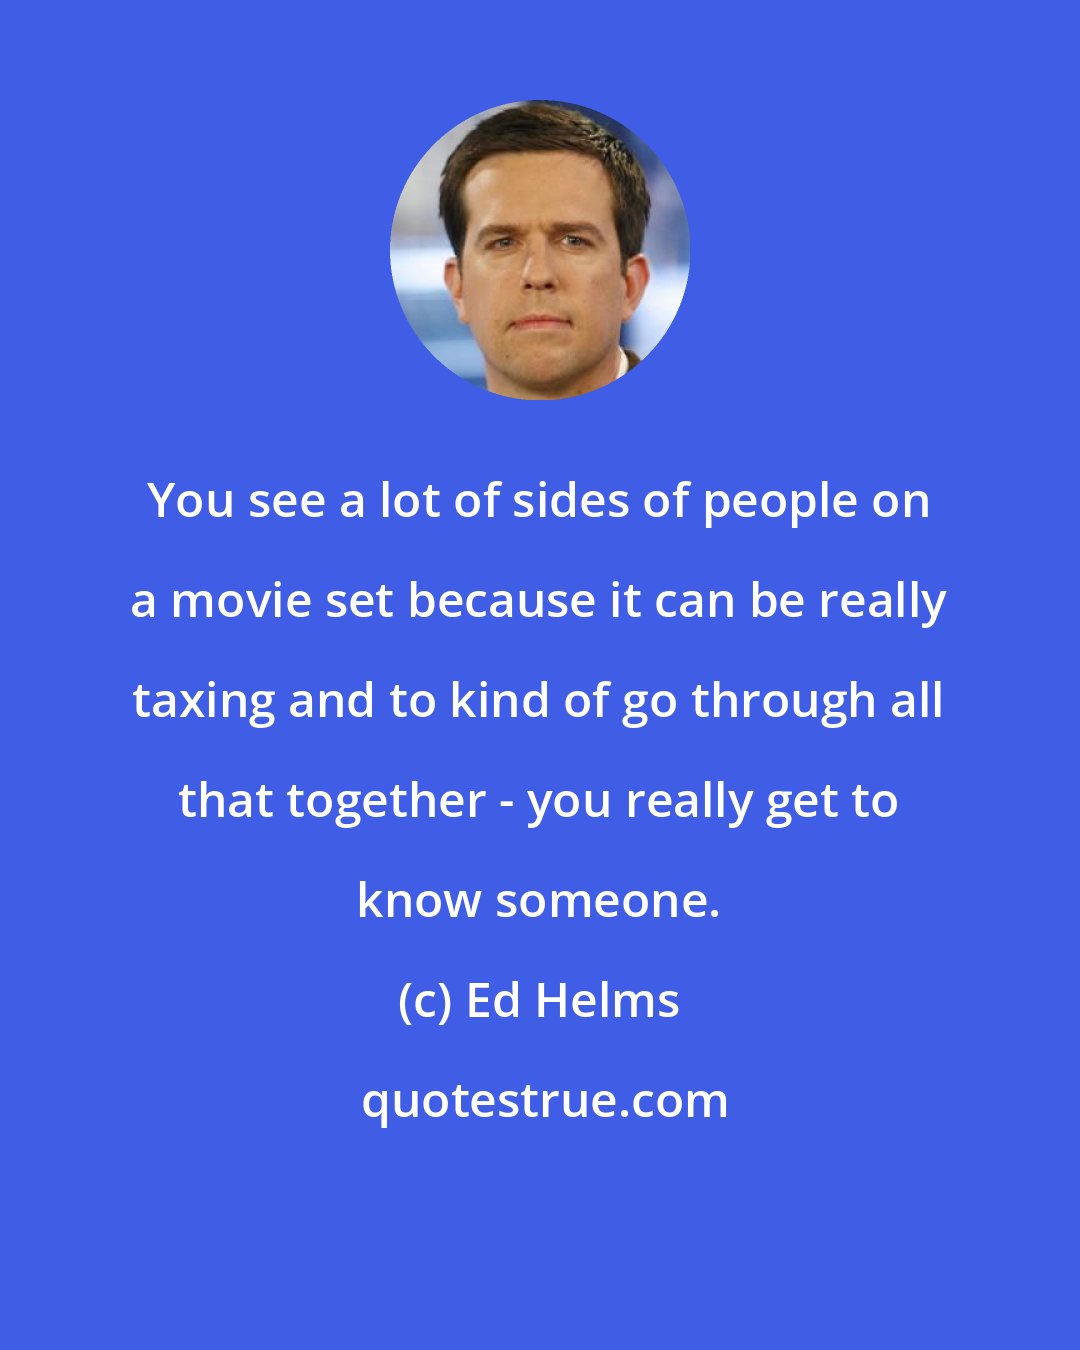 Ed Helms: You see a lot of sides of people on a movie set because it can be really taxing and to kind of go through all that together - you really get to know someone.